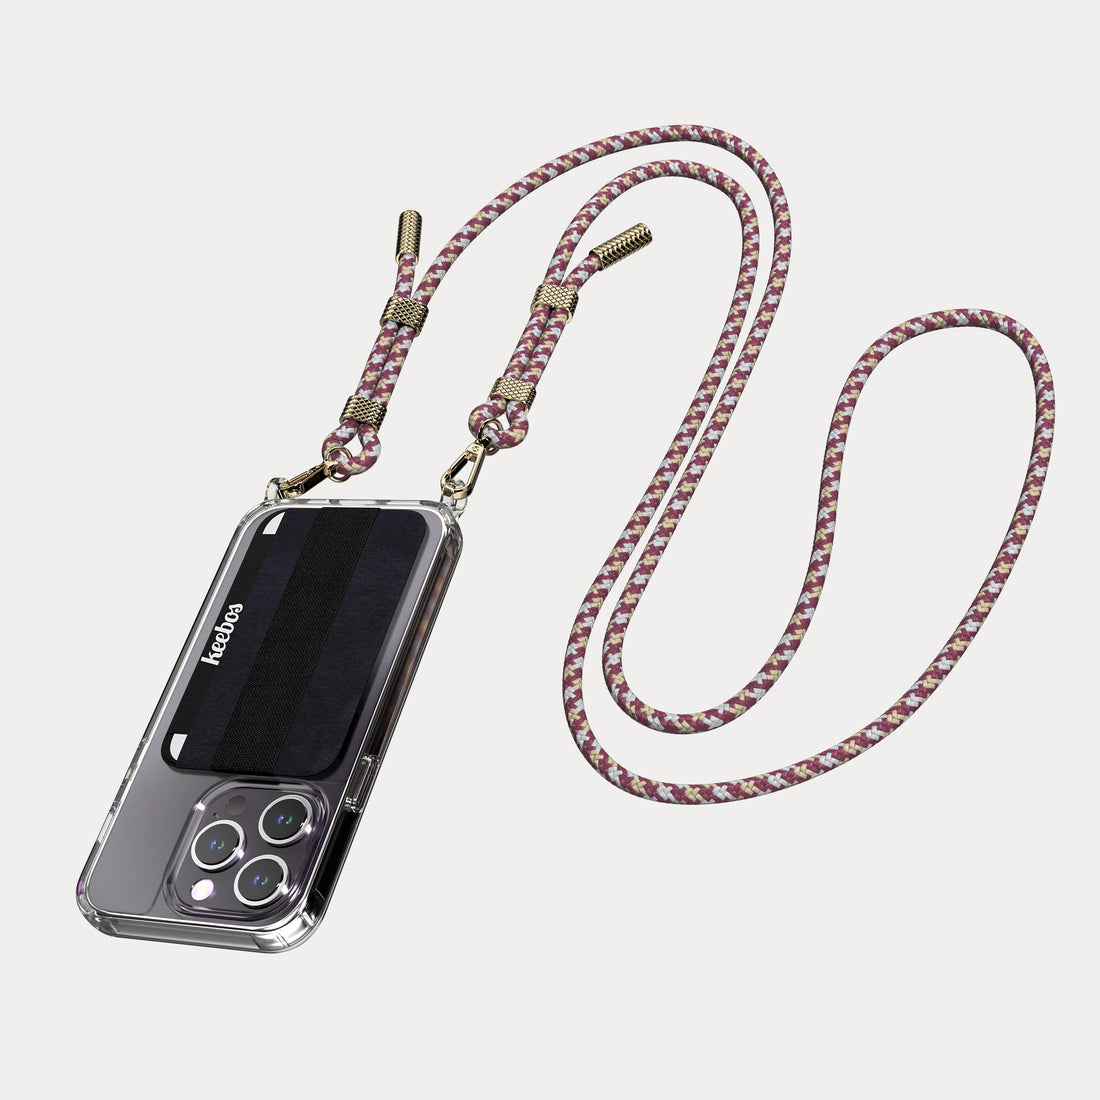 Elevating Your Experience iPhone Case with Lanyard Attachment - Keebos